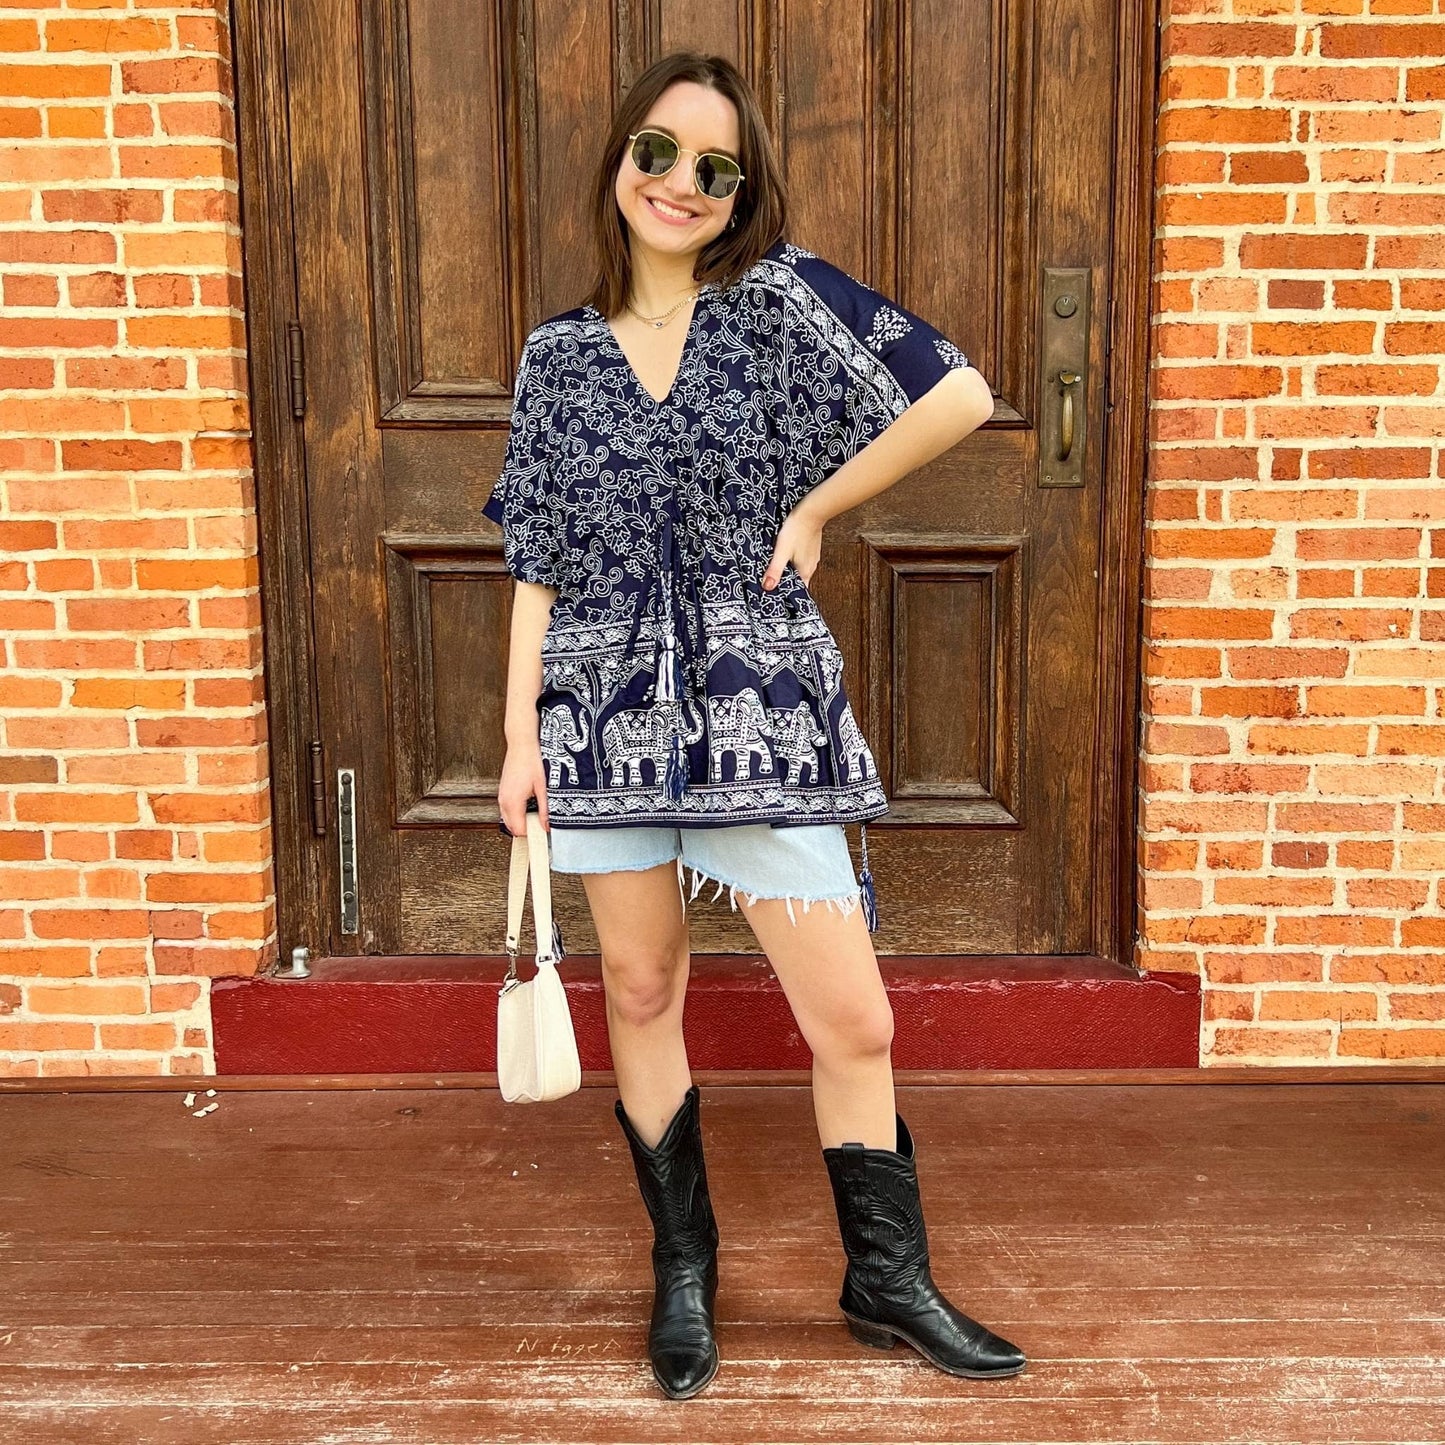 Model is wearing a navy eloise kaftan while standing in front of a wooden door on a brick porch.